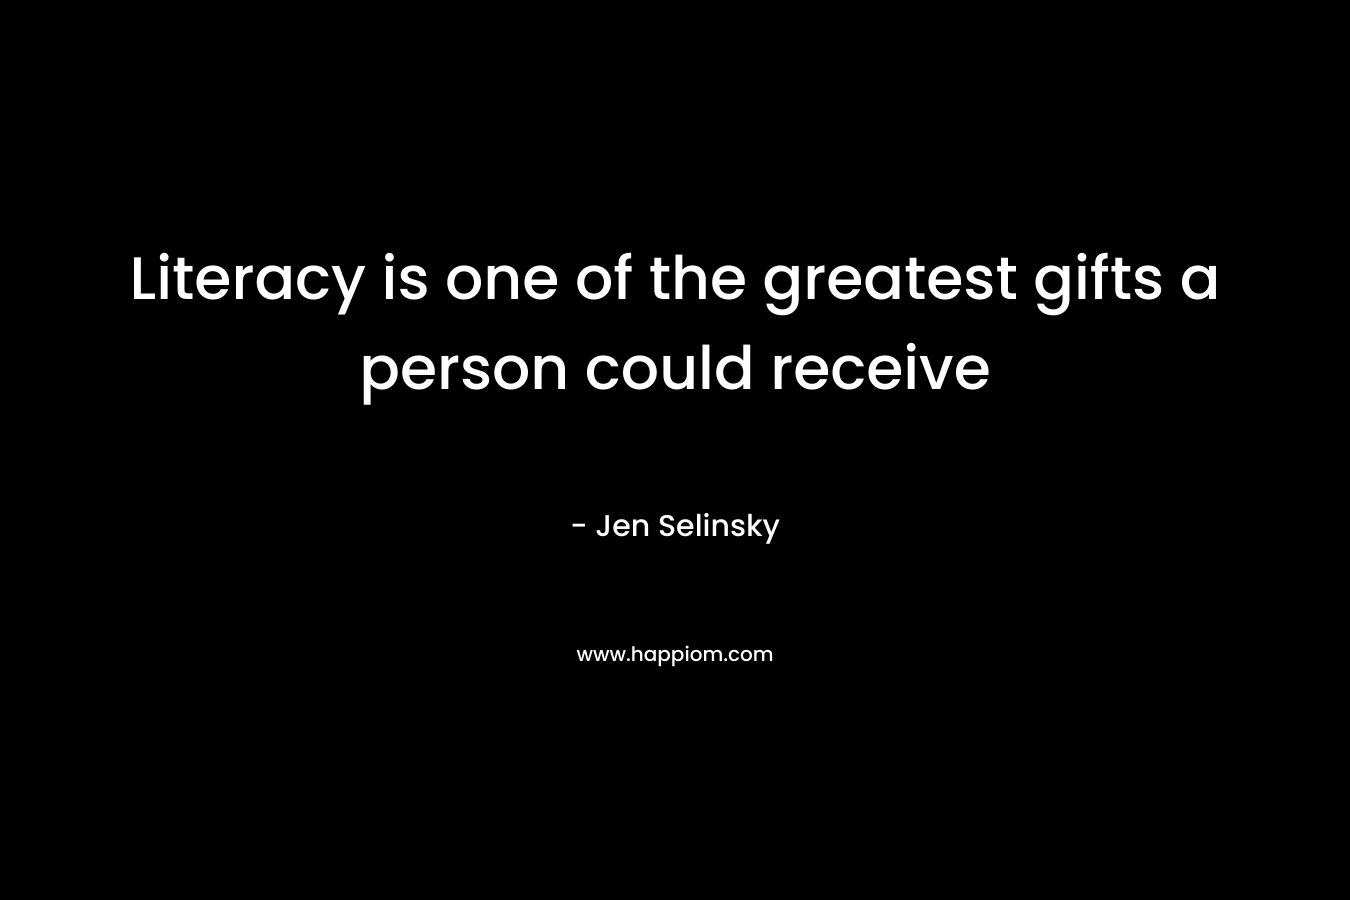 Literacy is one of the greatest gifts a person could receive – Jen Selinsky